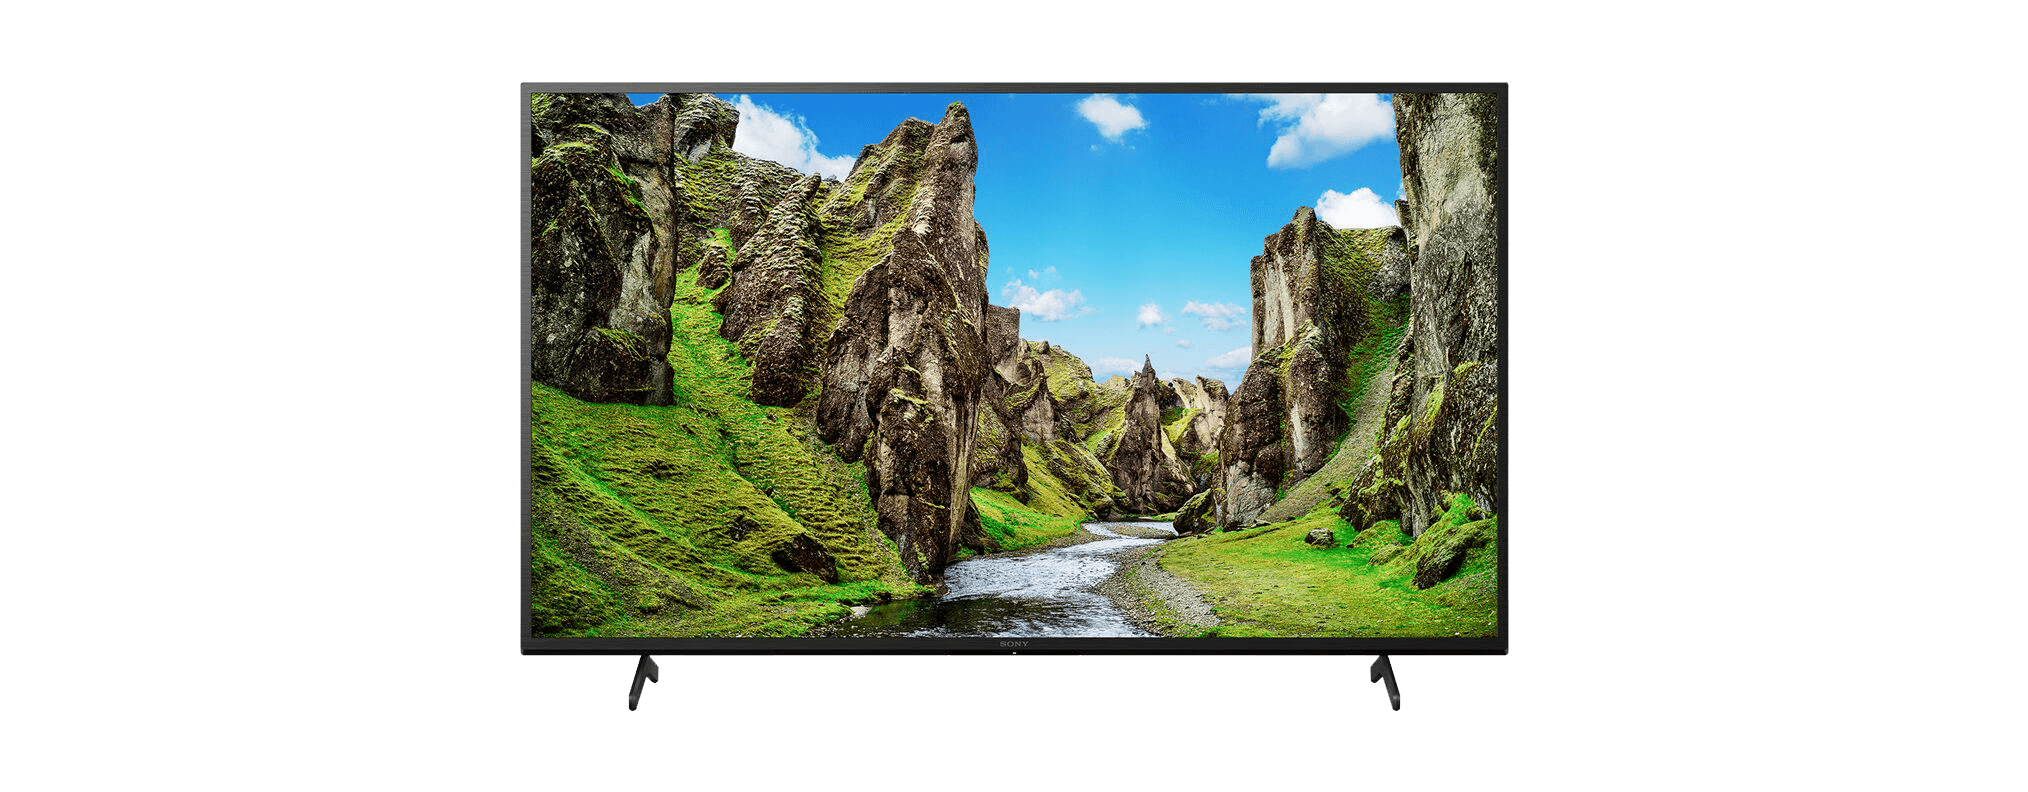 43X75 | 4K Ultra HD | HDR | Smart TV (Android TV)_1